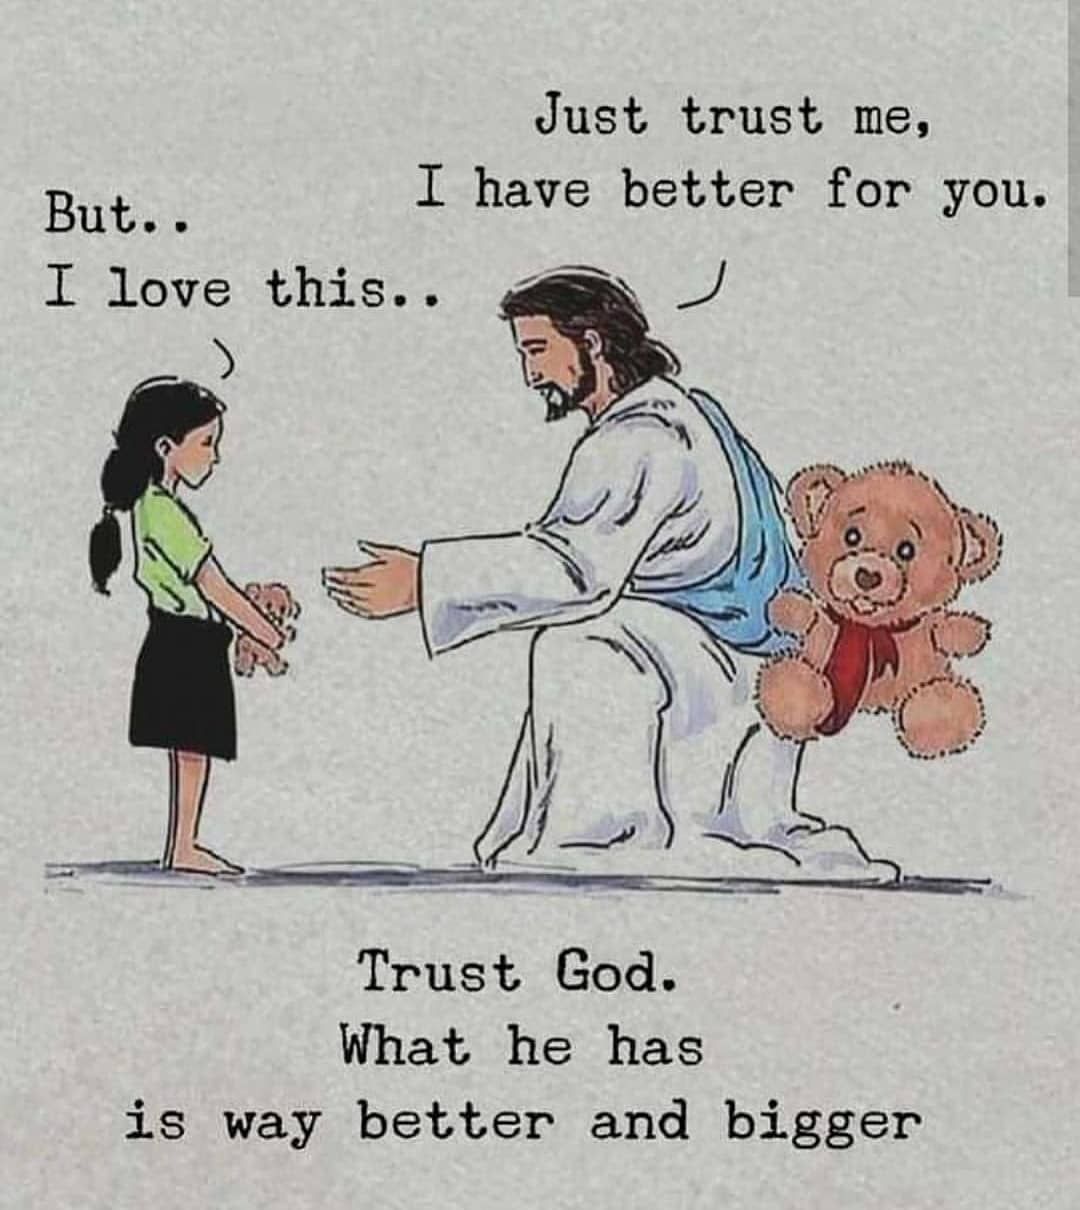 Just trust me, I have better for you.  But.. I love this..  Trust God. What he has is way better and bigger.